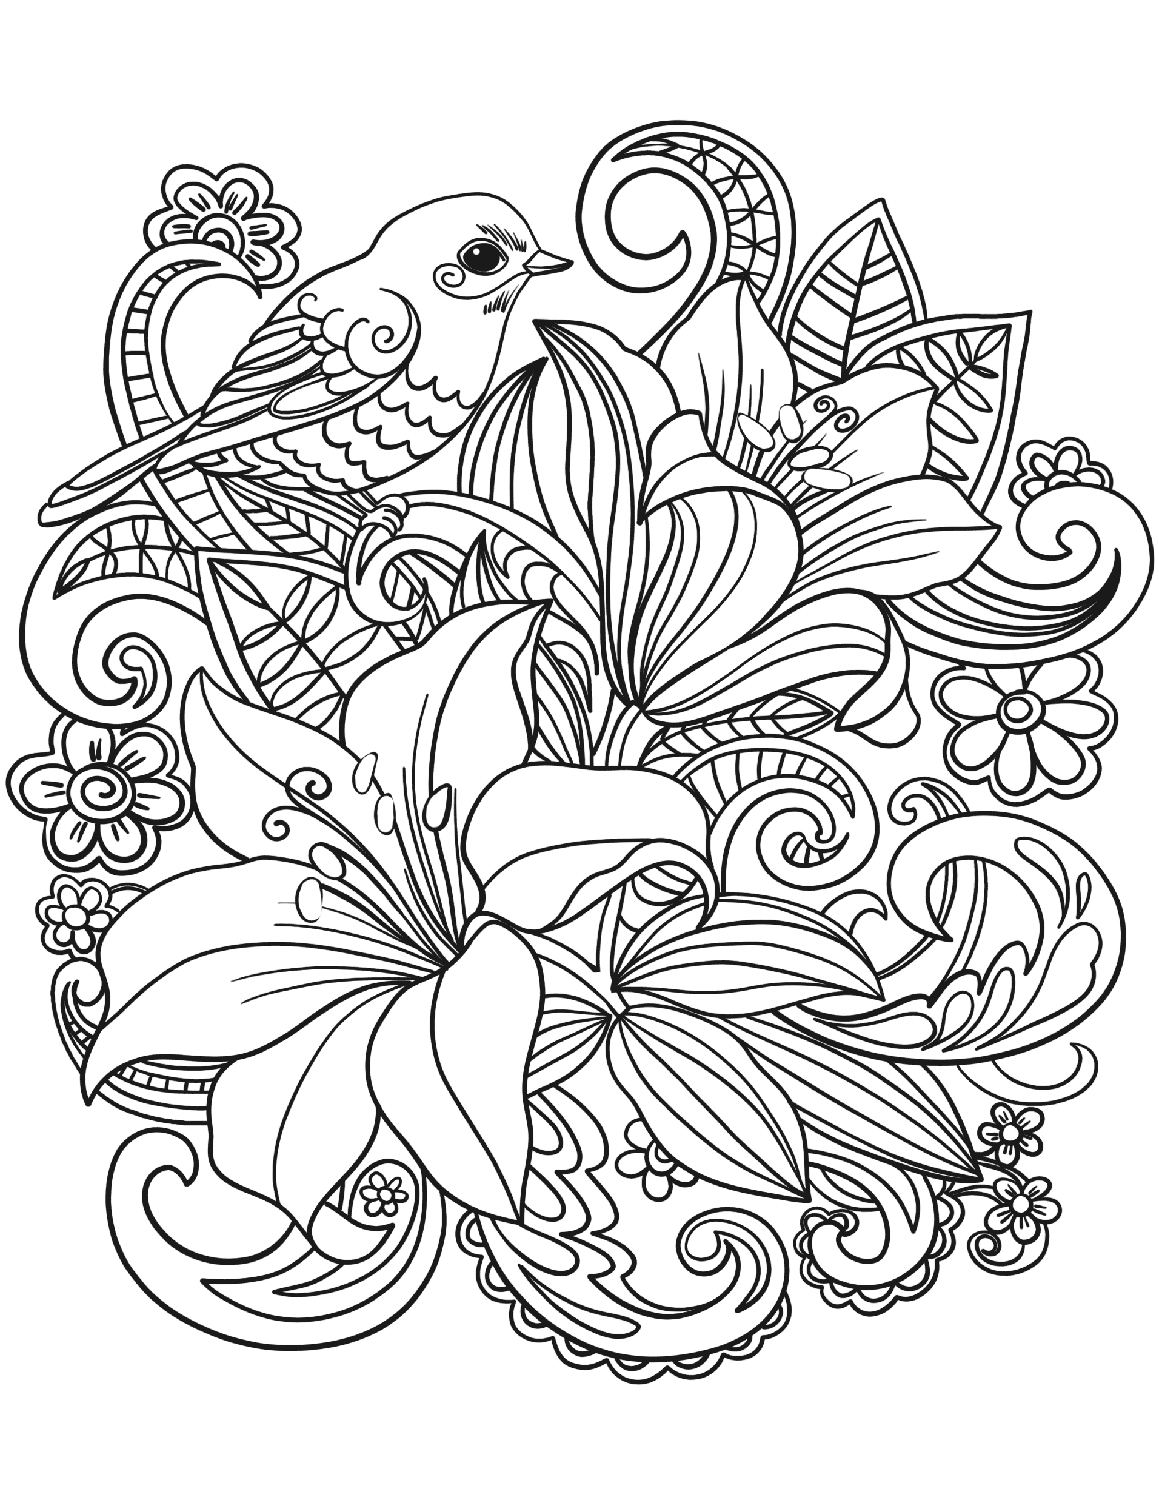 Download Floral Coloring Pages for Adults - Best Coloring Pages For ...